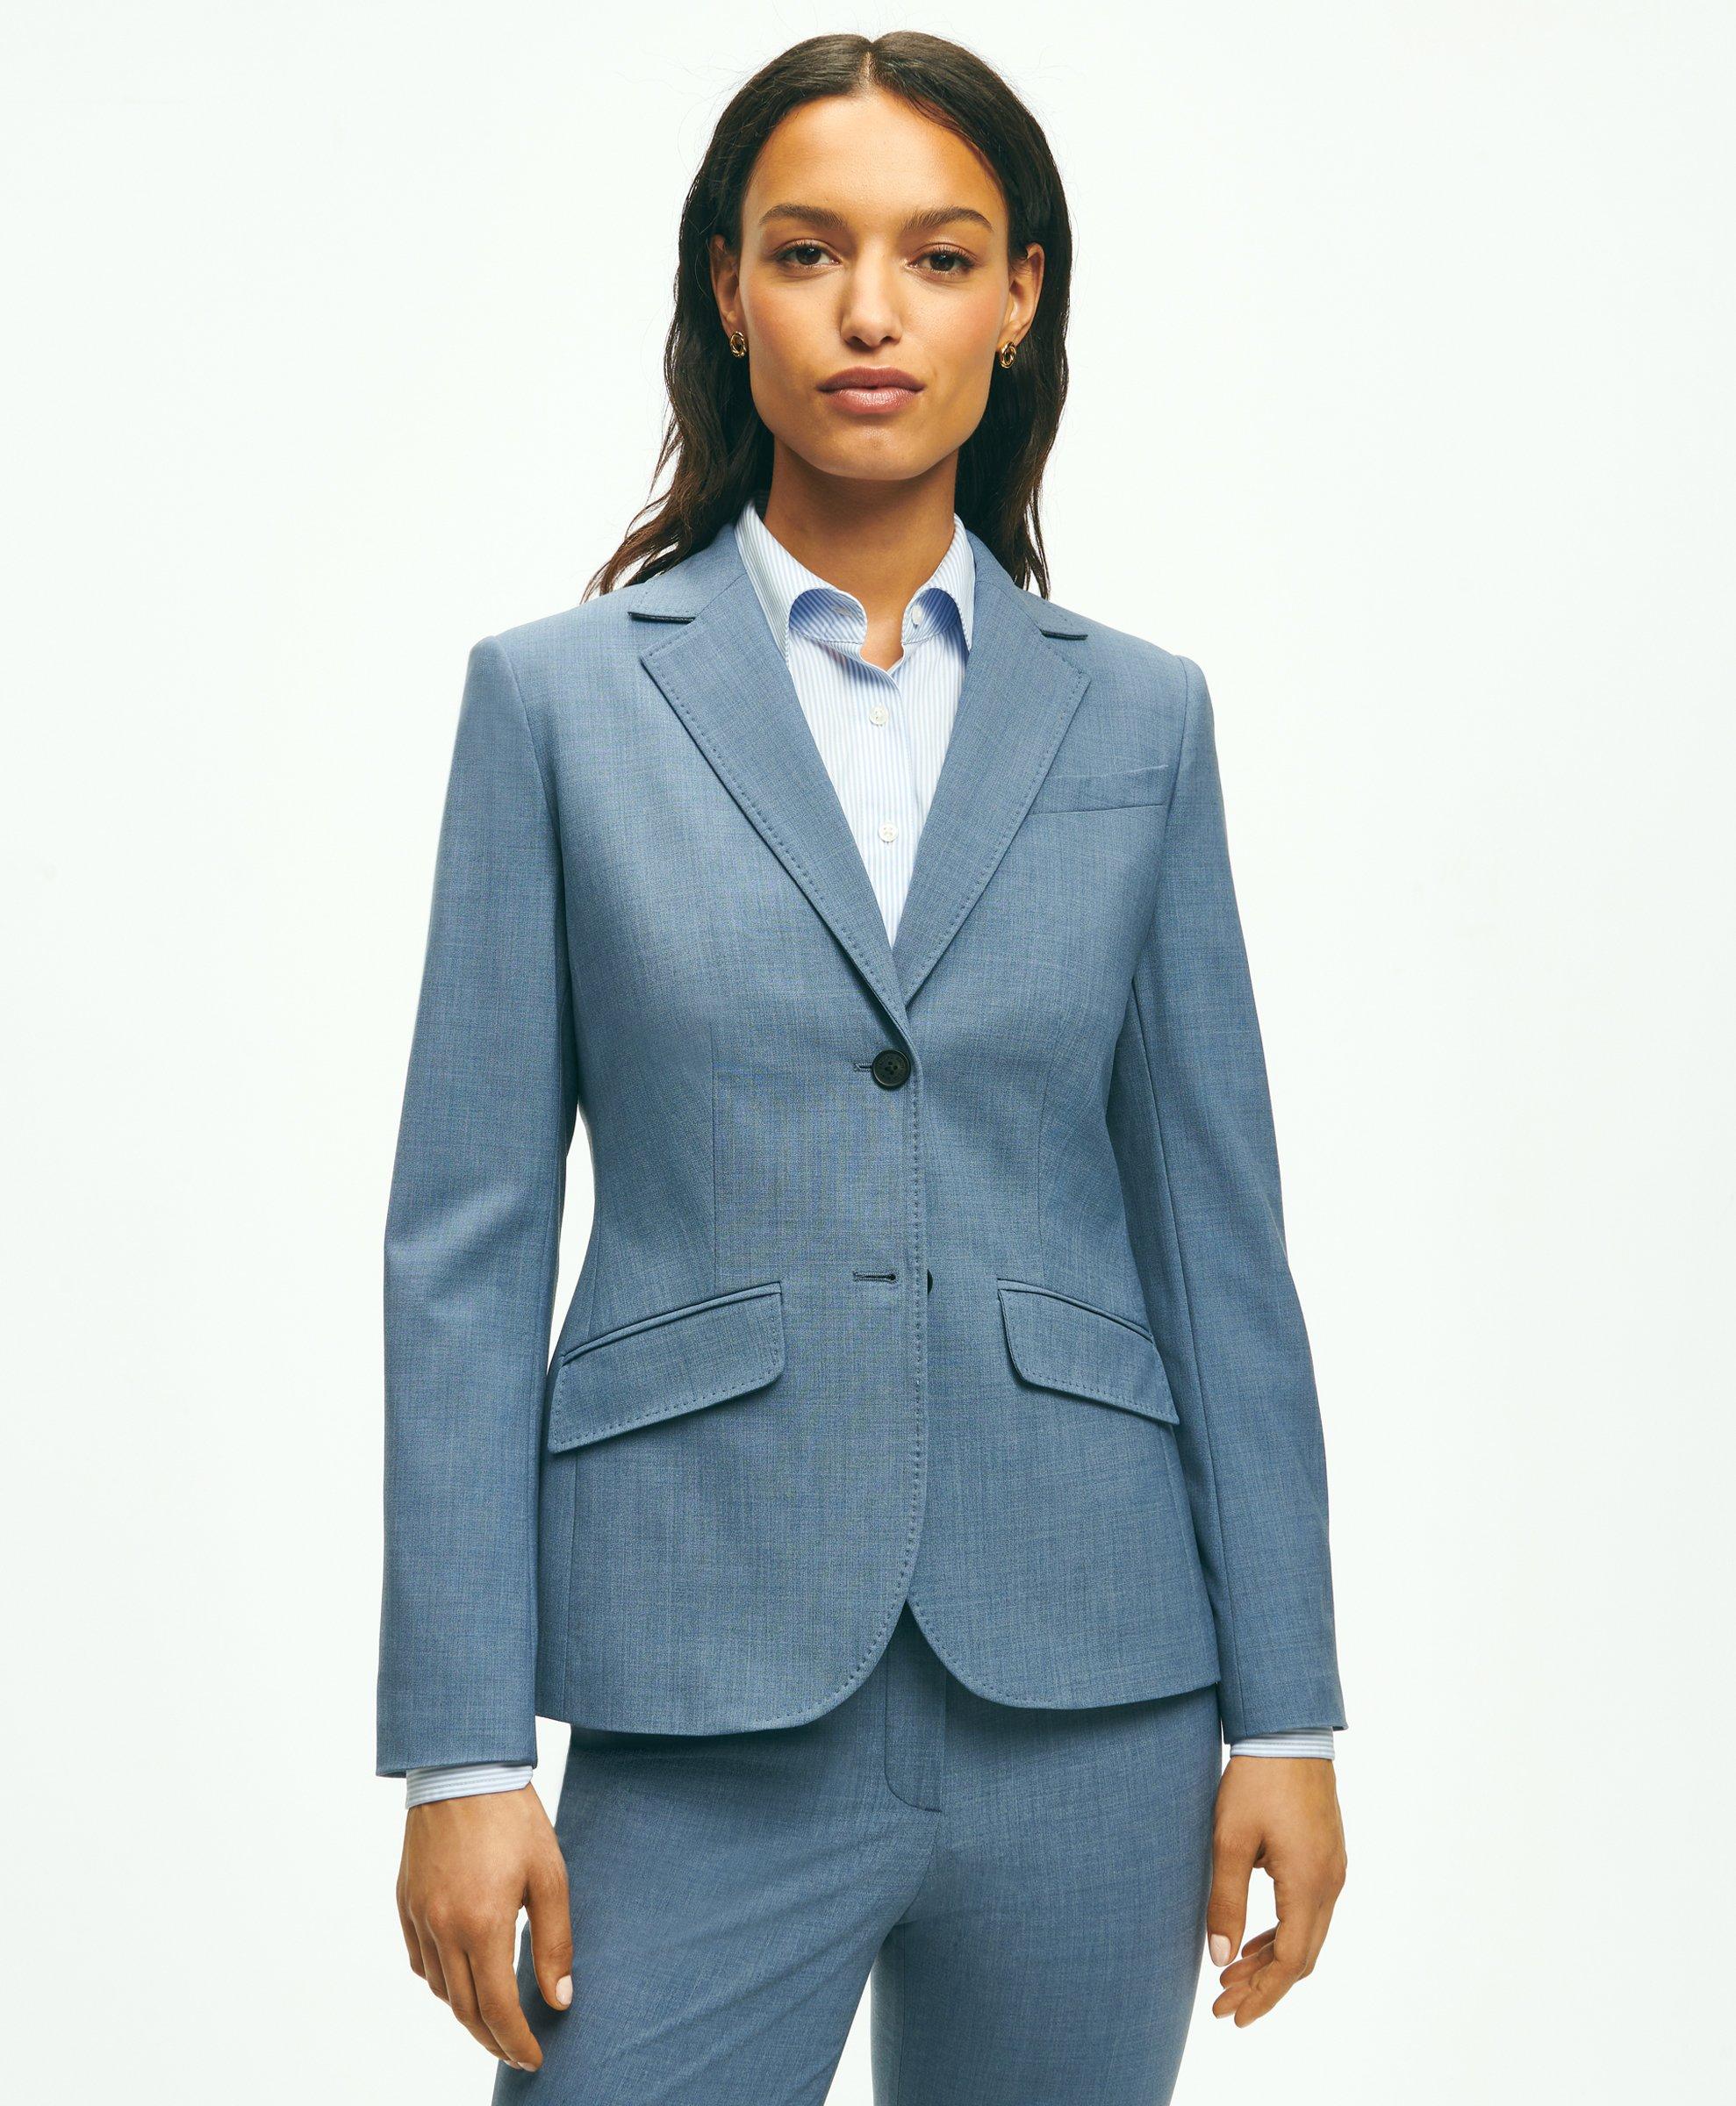 Women's Essential Clothing: Suits, Tops & More